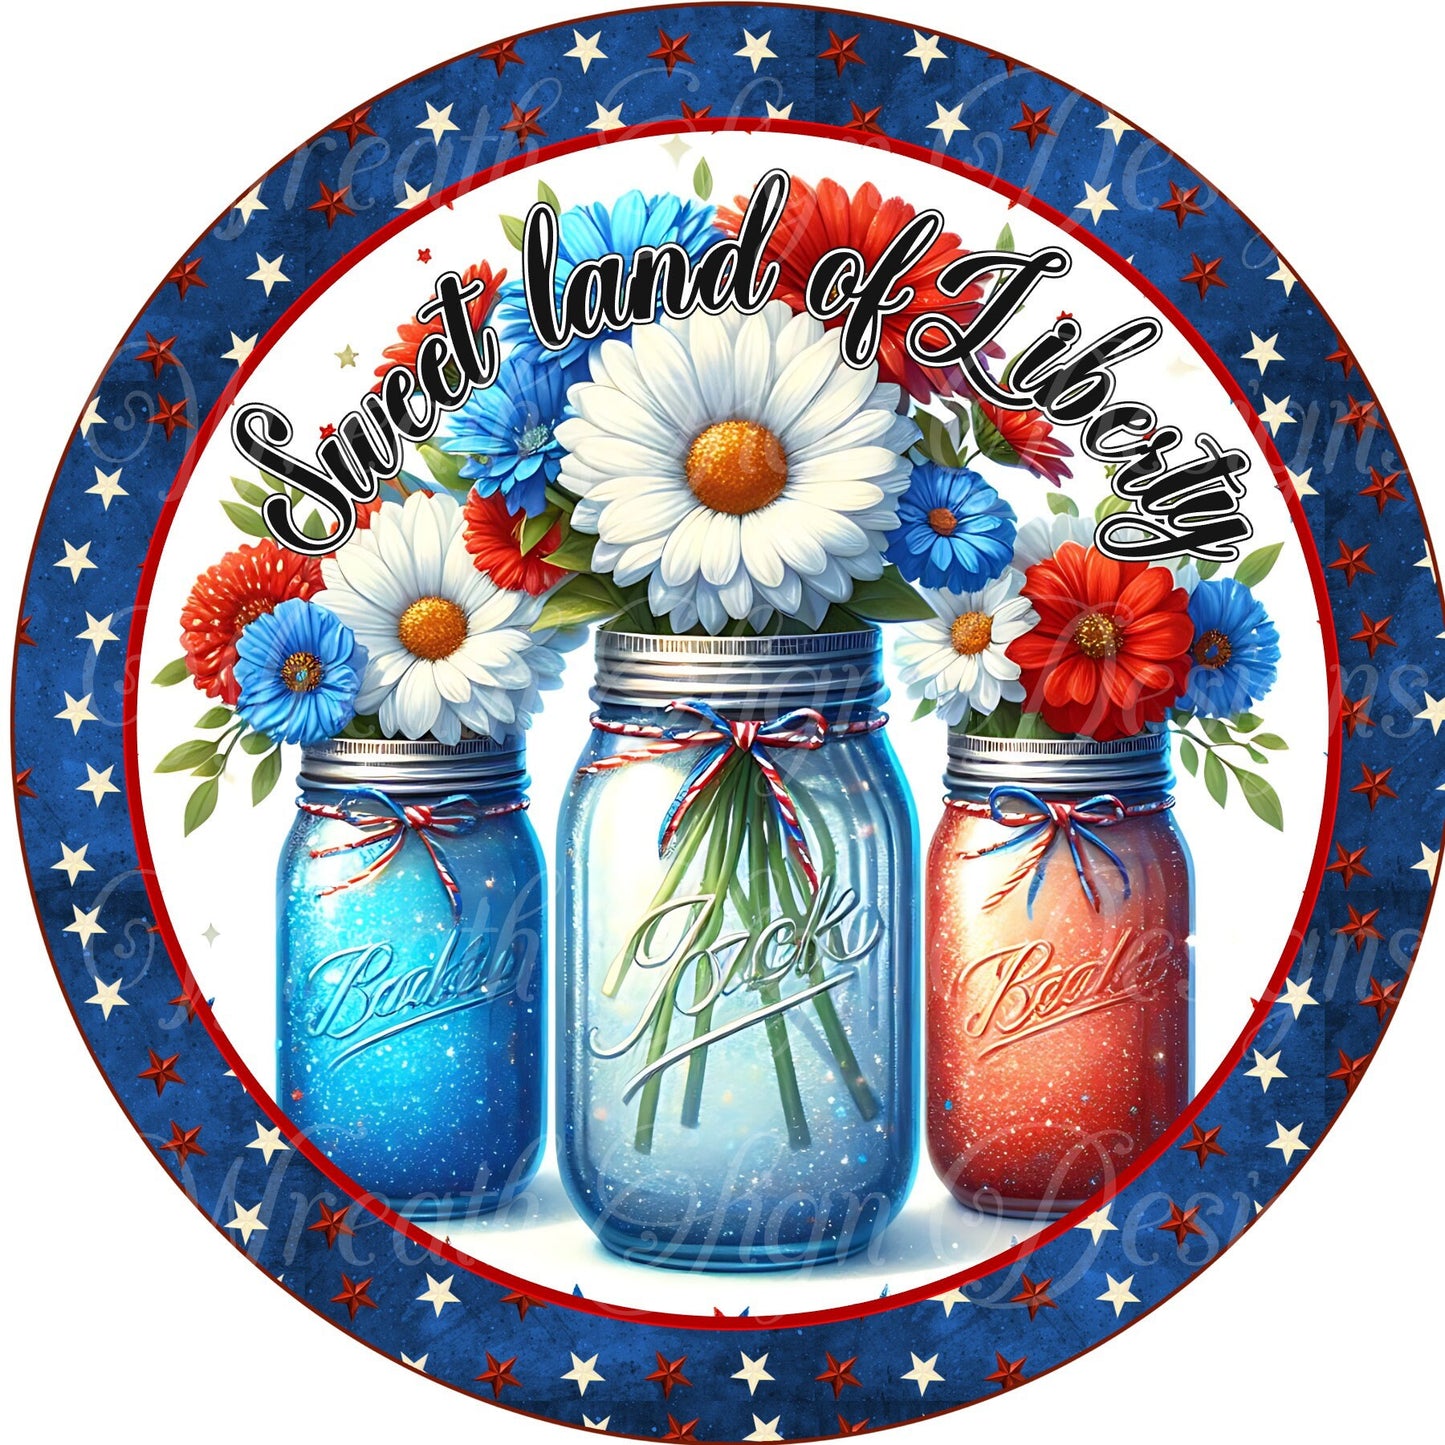 sweet land of liberty, freedom. 4th of july. patriotic metal sign  Round sign, Wreath attachment, Wreath center, easter tiered tray sign